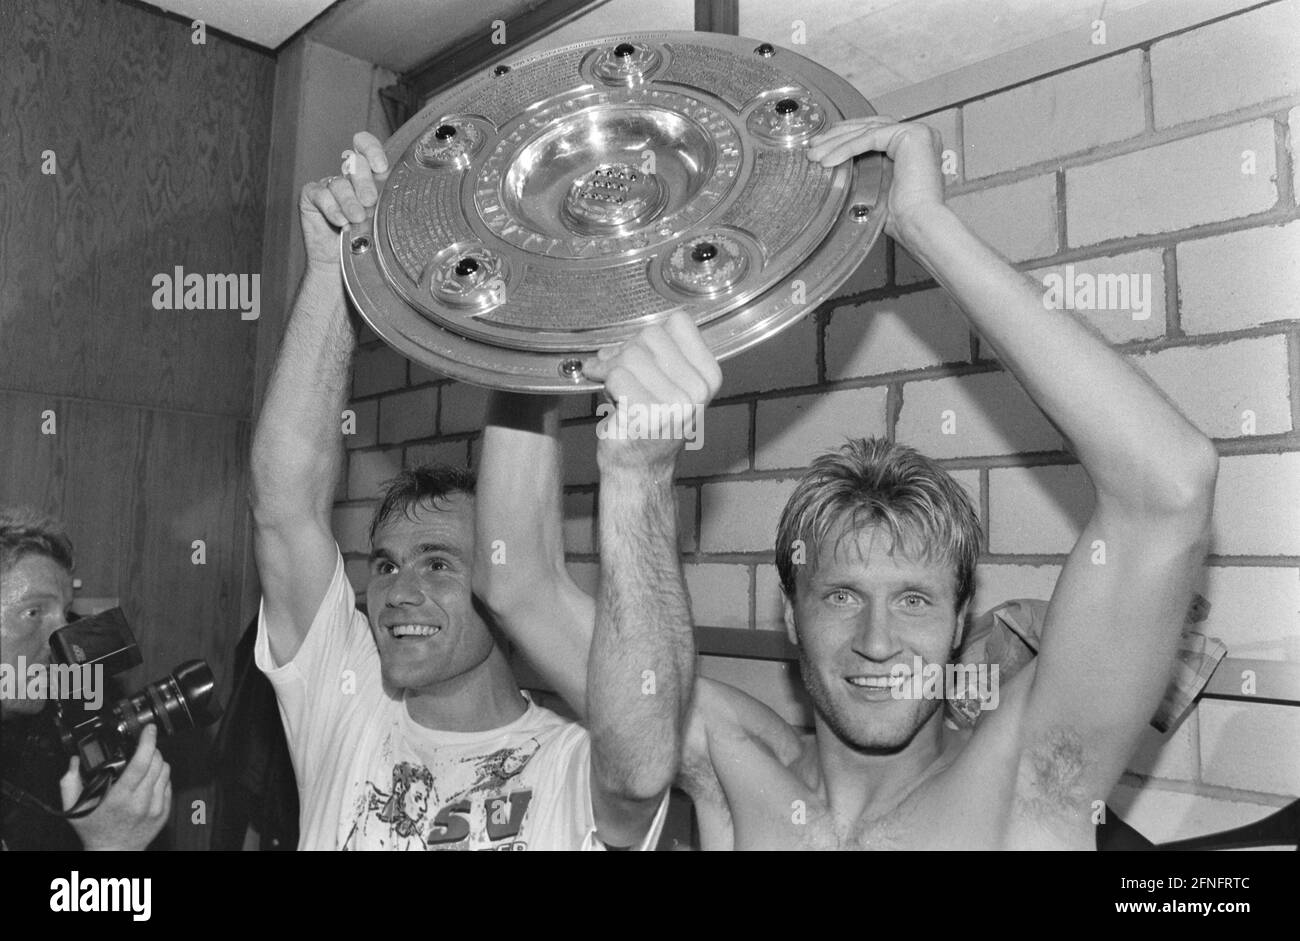 FOOTBALL 1st FEDERAL LEAGUE SEASON 1992/1993 34th Matchday VfB Stuttgart - Werder Bremen 05.06.1993 Bernd Hobsch and Thomas Wolter (from left, both Werder Bremen) celebrate in the dressing room with the championship trophy PHOTO: WEREK Pressebildagentur xxNOxMODELxRELEASExx [automated translation] Stock Photo